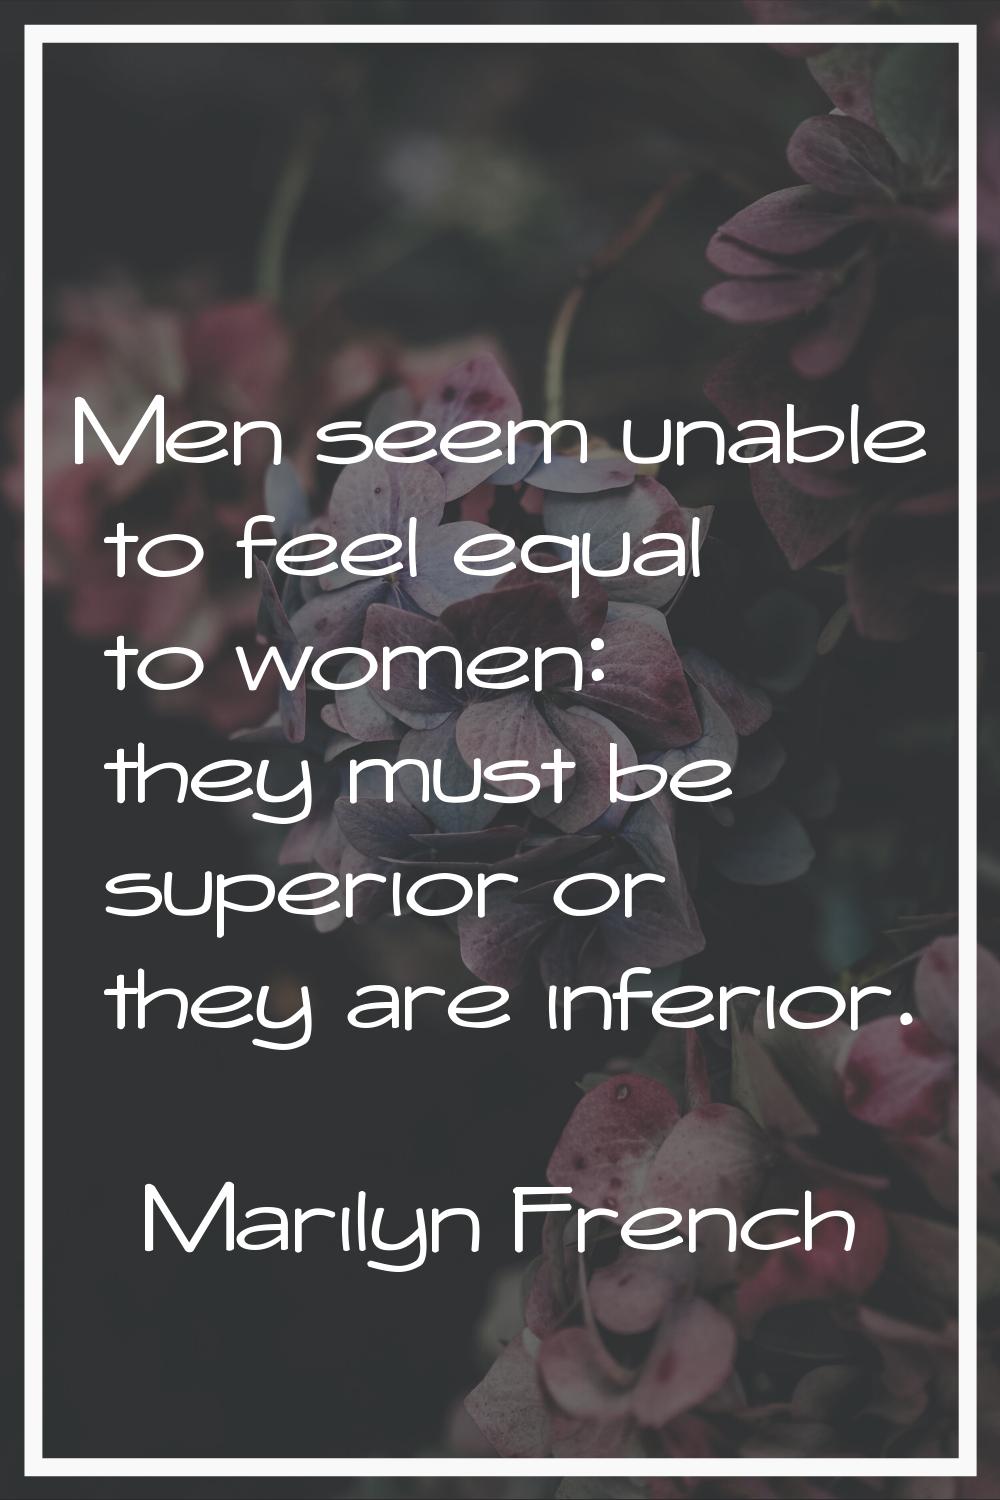 Men seem unable to feel equal to women: they must be superior or they are inferior.